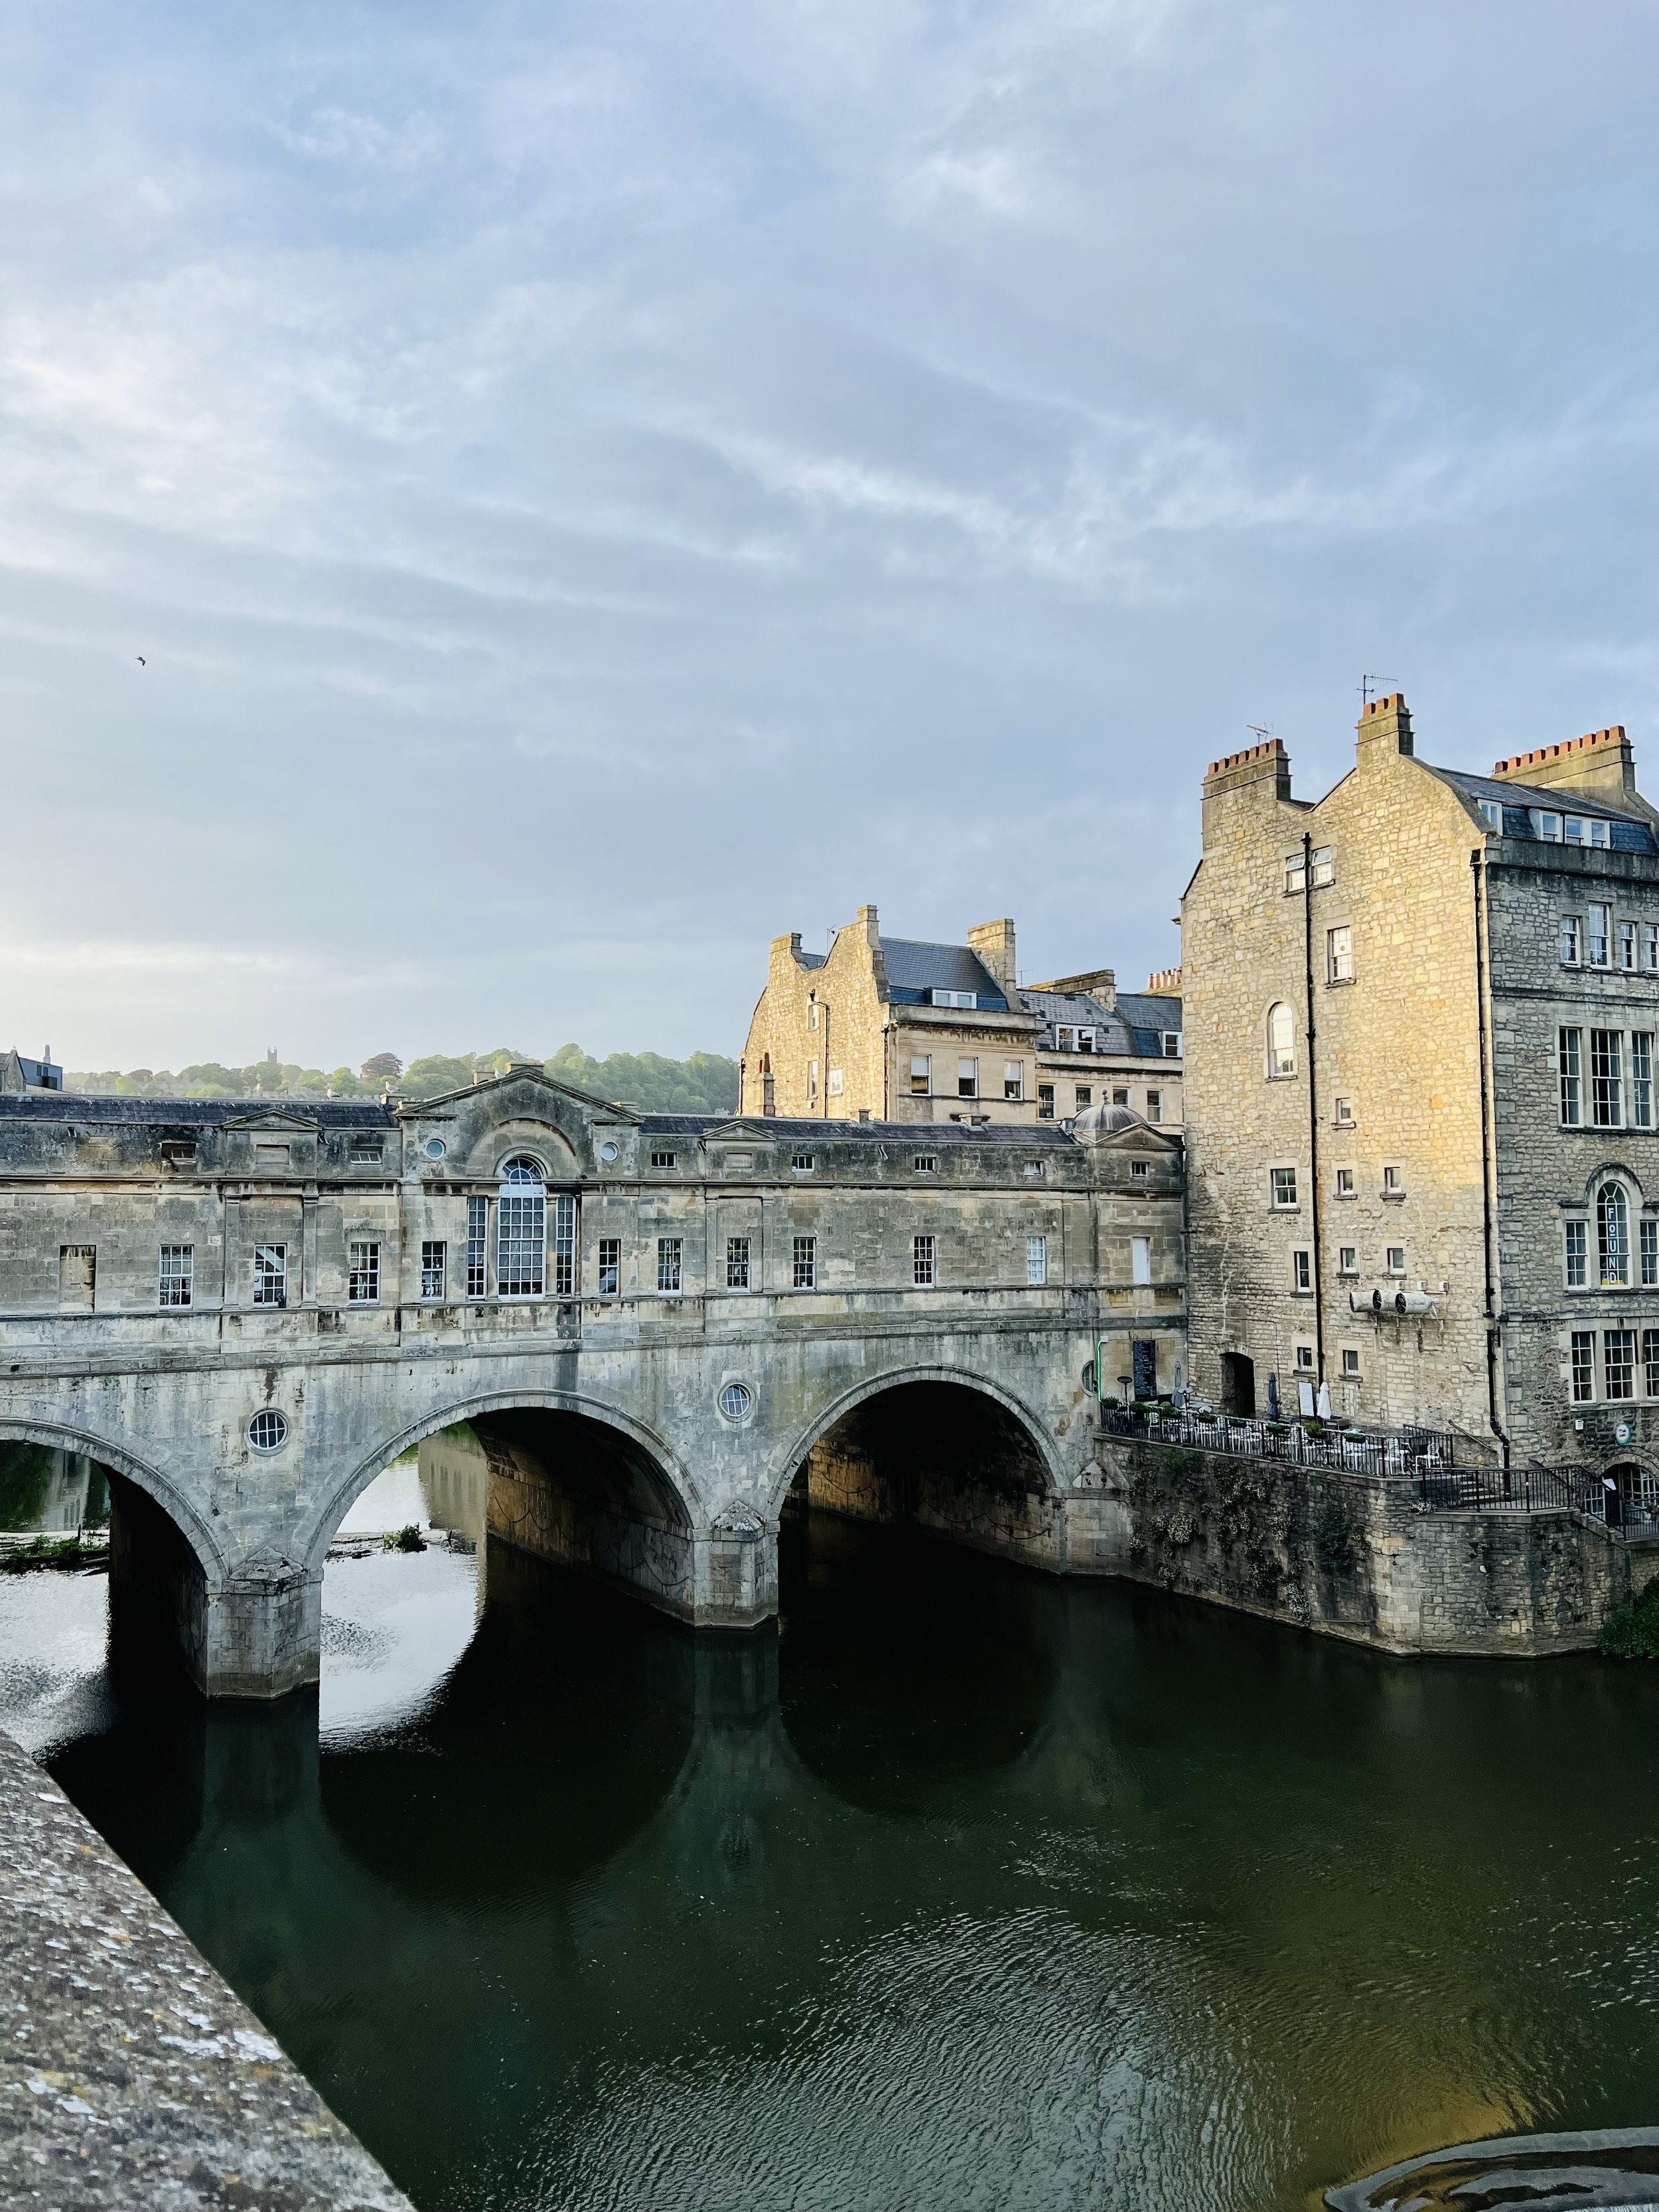 Such a lovely area: Pulteney Bridge